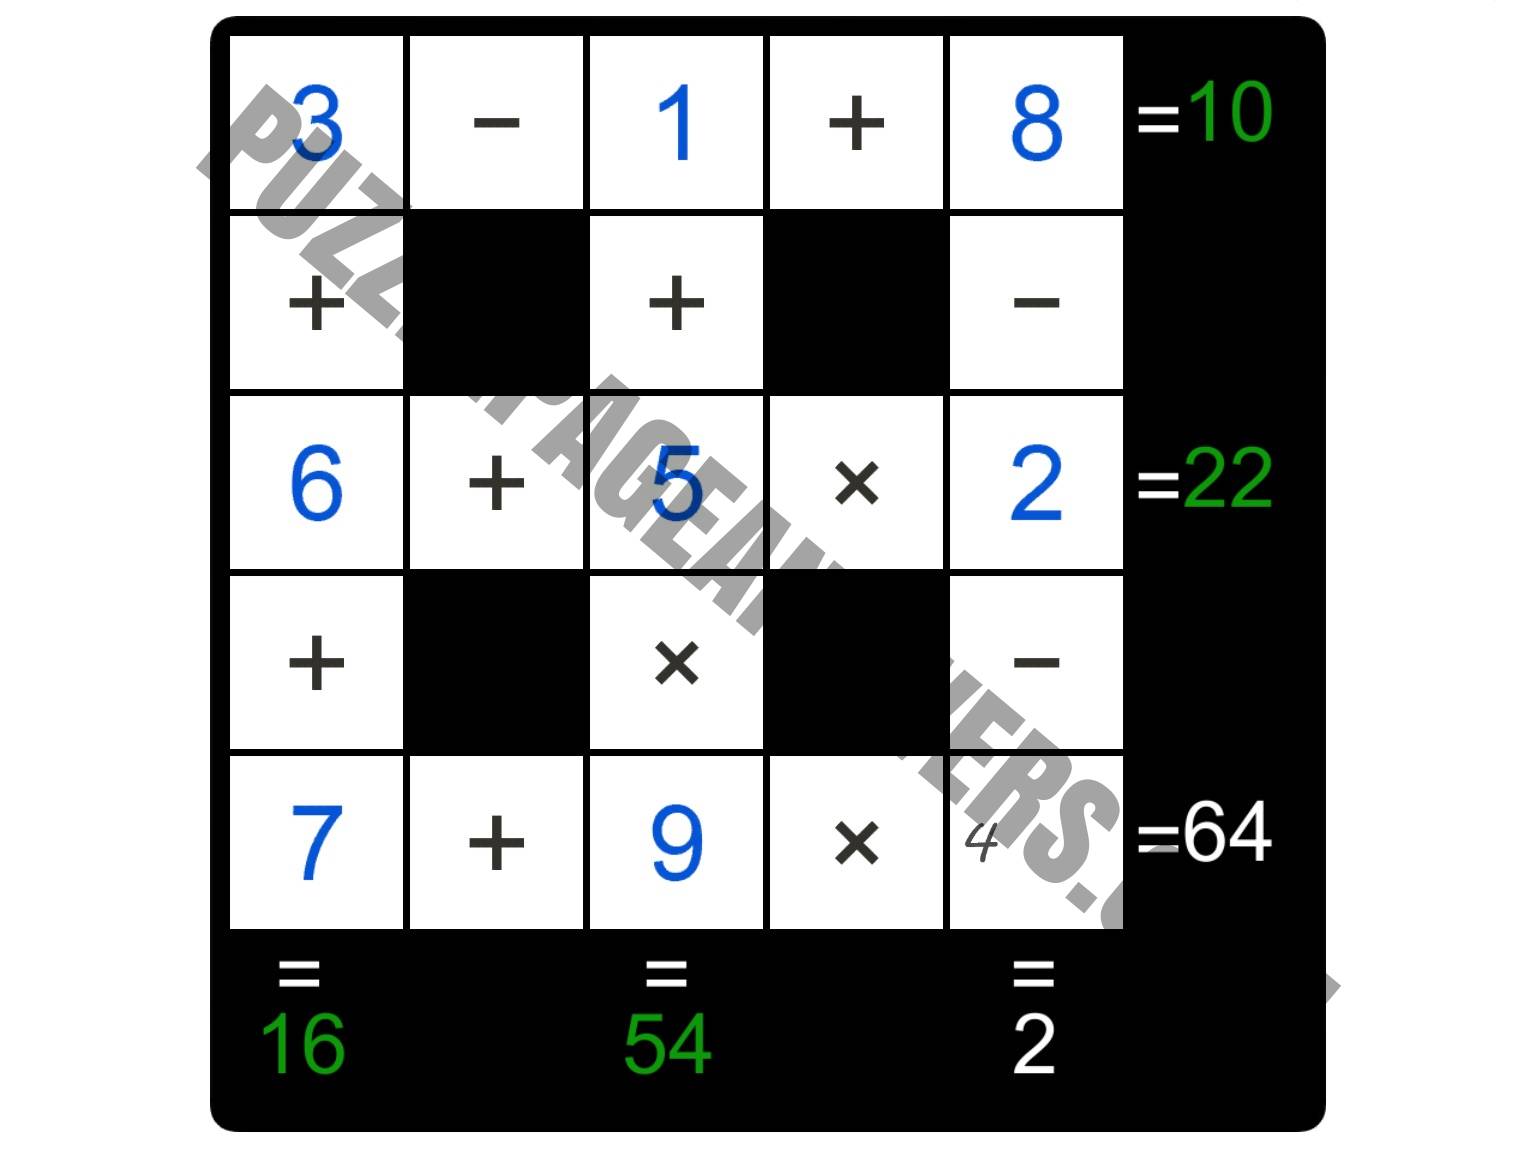 Puzzle Page Cross Sum March 6 2019 Answers PuzzlePageAnswers com